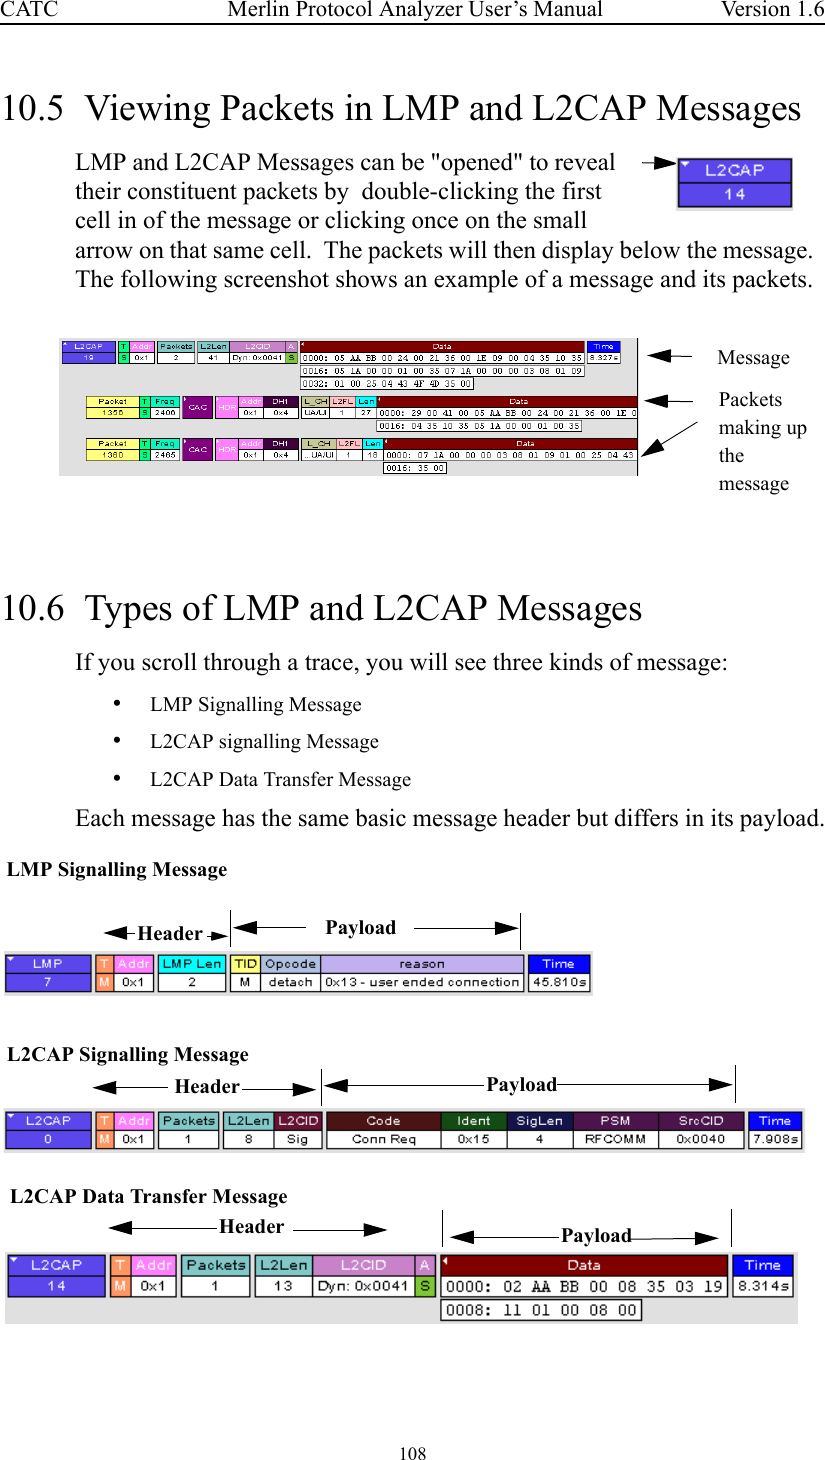 108 Merlin Protocol Analyzer User’s ManualCATC Version 1.610.5  Viewing Packets in LMP and L2CAP MessagesLMP and L2CAP Messages can be &quot;opened&quot; to reveal their constituent packets by  double-clicking the first cell in of the message or clicking once on the small arrow on that same cell.  The packets will then display below the message.  The following screenshot shows an example of a message and its packets.10.6  Types of LMP and L2CAP MessagesIf you scroll through a trace, you will see three kinds of message:  •LMP Signalling Message•L2CAP signalling Message•L2CAP Data Transfer MessageEach message has the same basic message header but differs in its payload.MessagePacketsmaking upthemessageLMP Signalling MessageL2CAP Signalling MessageL2CAP Data Transfer MessagePayloadPayloadHeader PayloadHeaderHeader